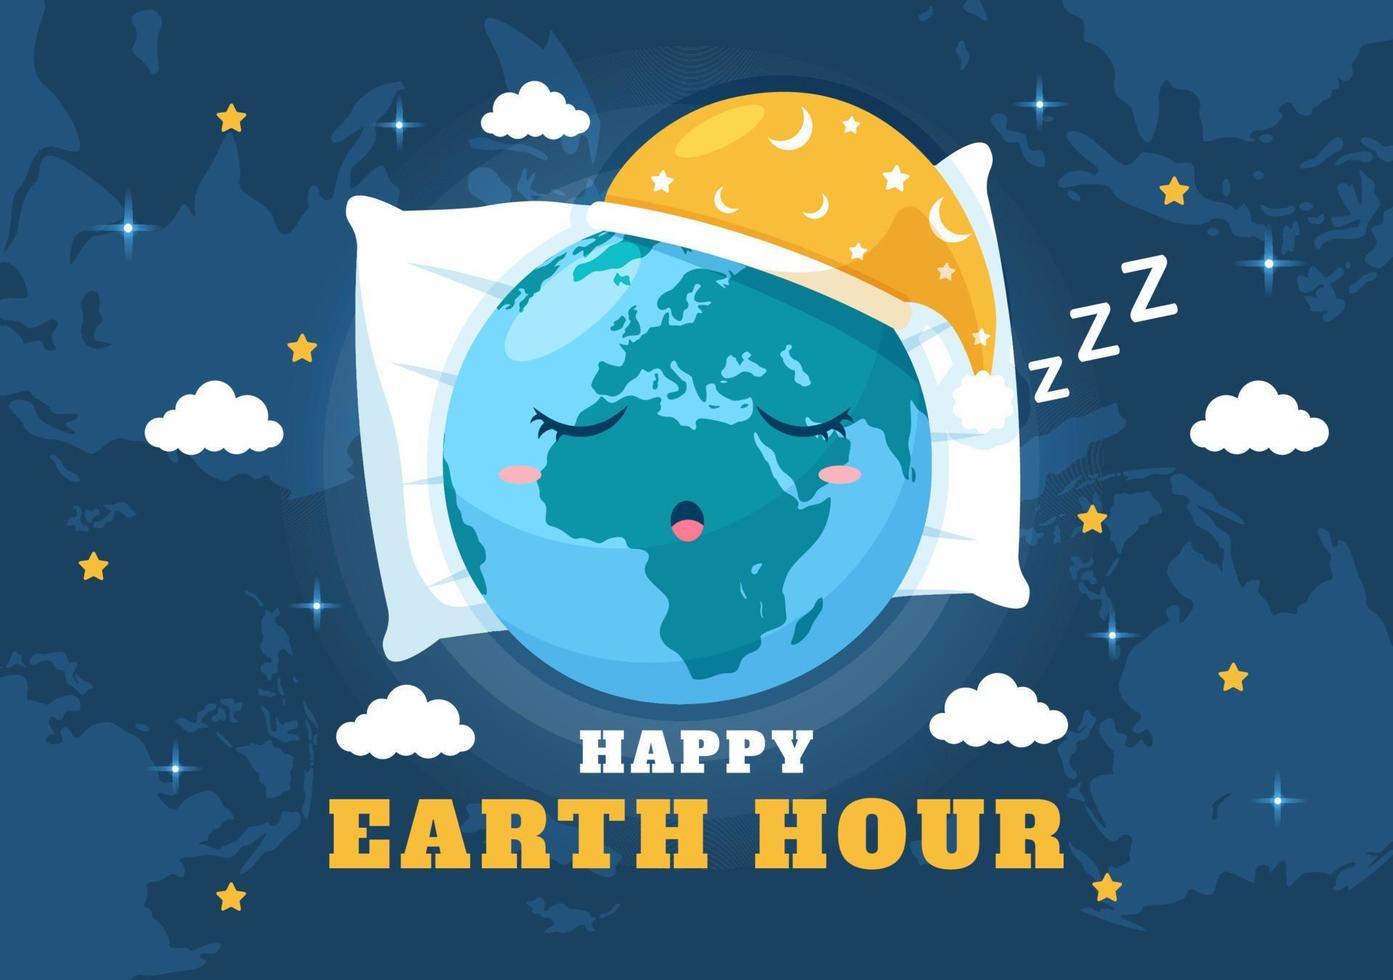 Happy Earth Hour Day Illustration with Lightbulb, World Map and Time to Turn Off in Flat Sleep Cartoon Hand Drawn Landing Page Templates vector